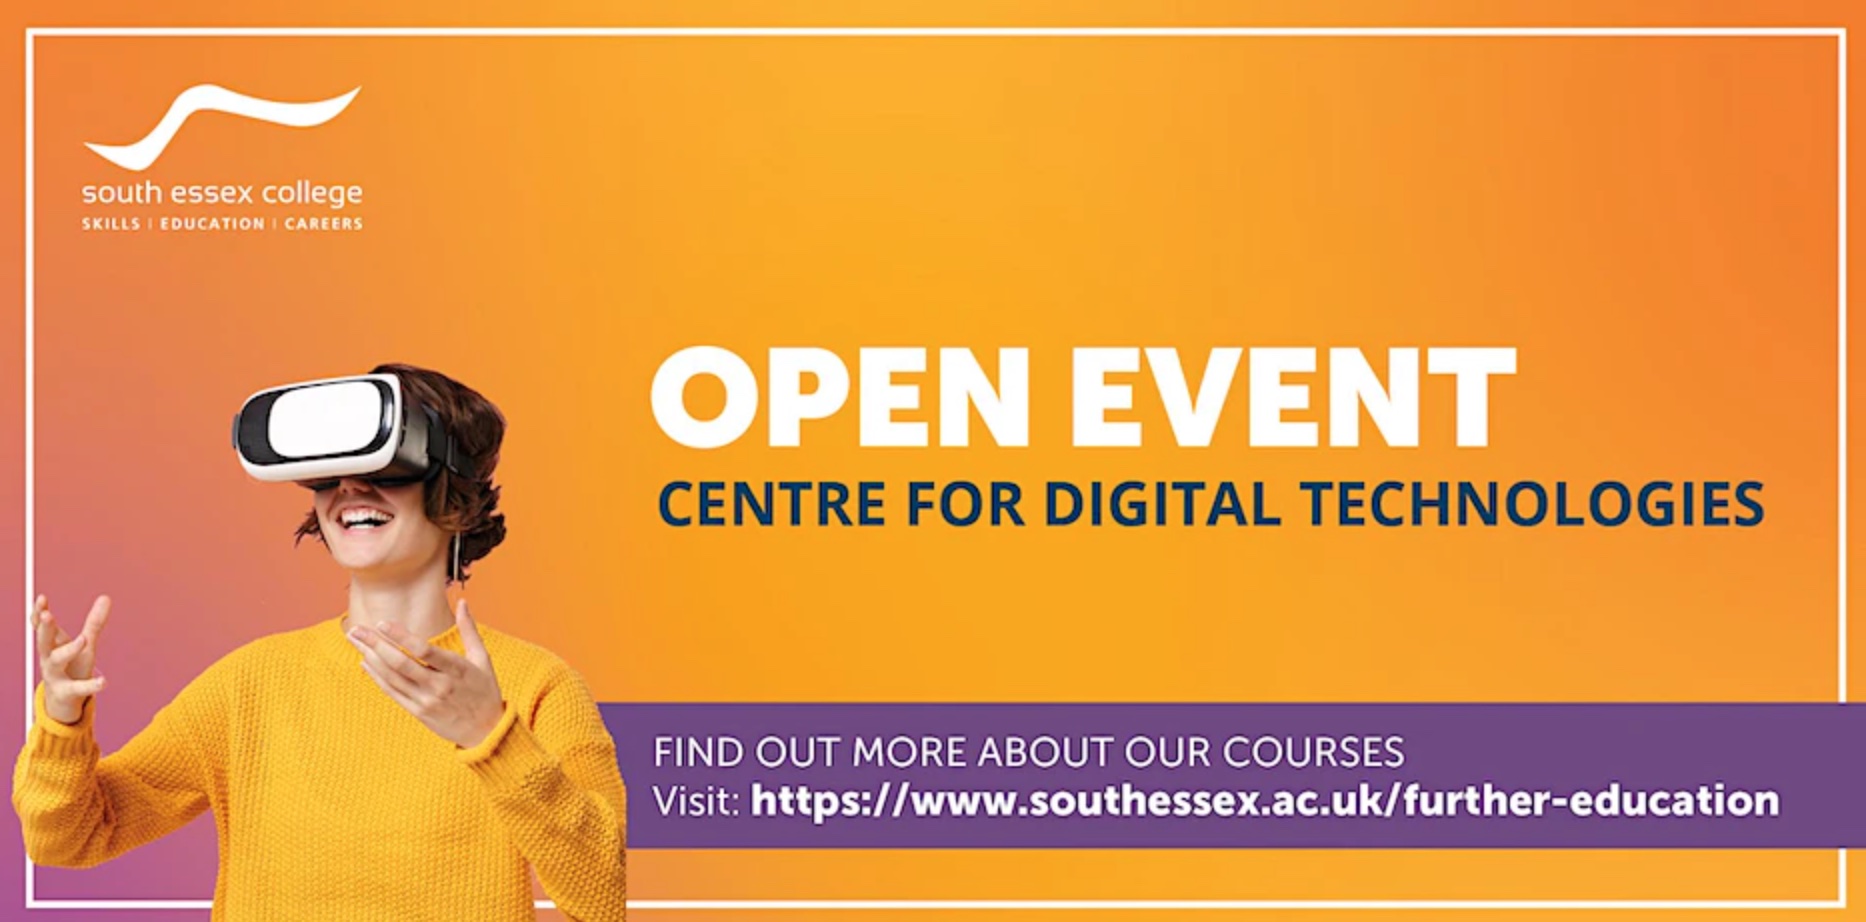 Open Event at South Essex College, Centre for Digital Technologies 2022-23